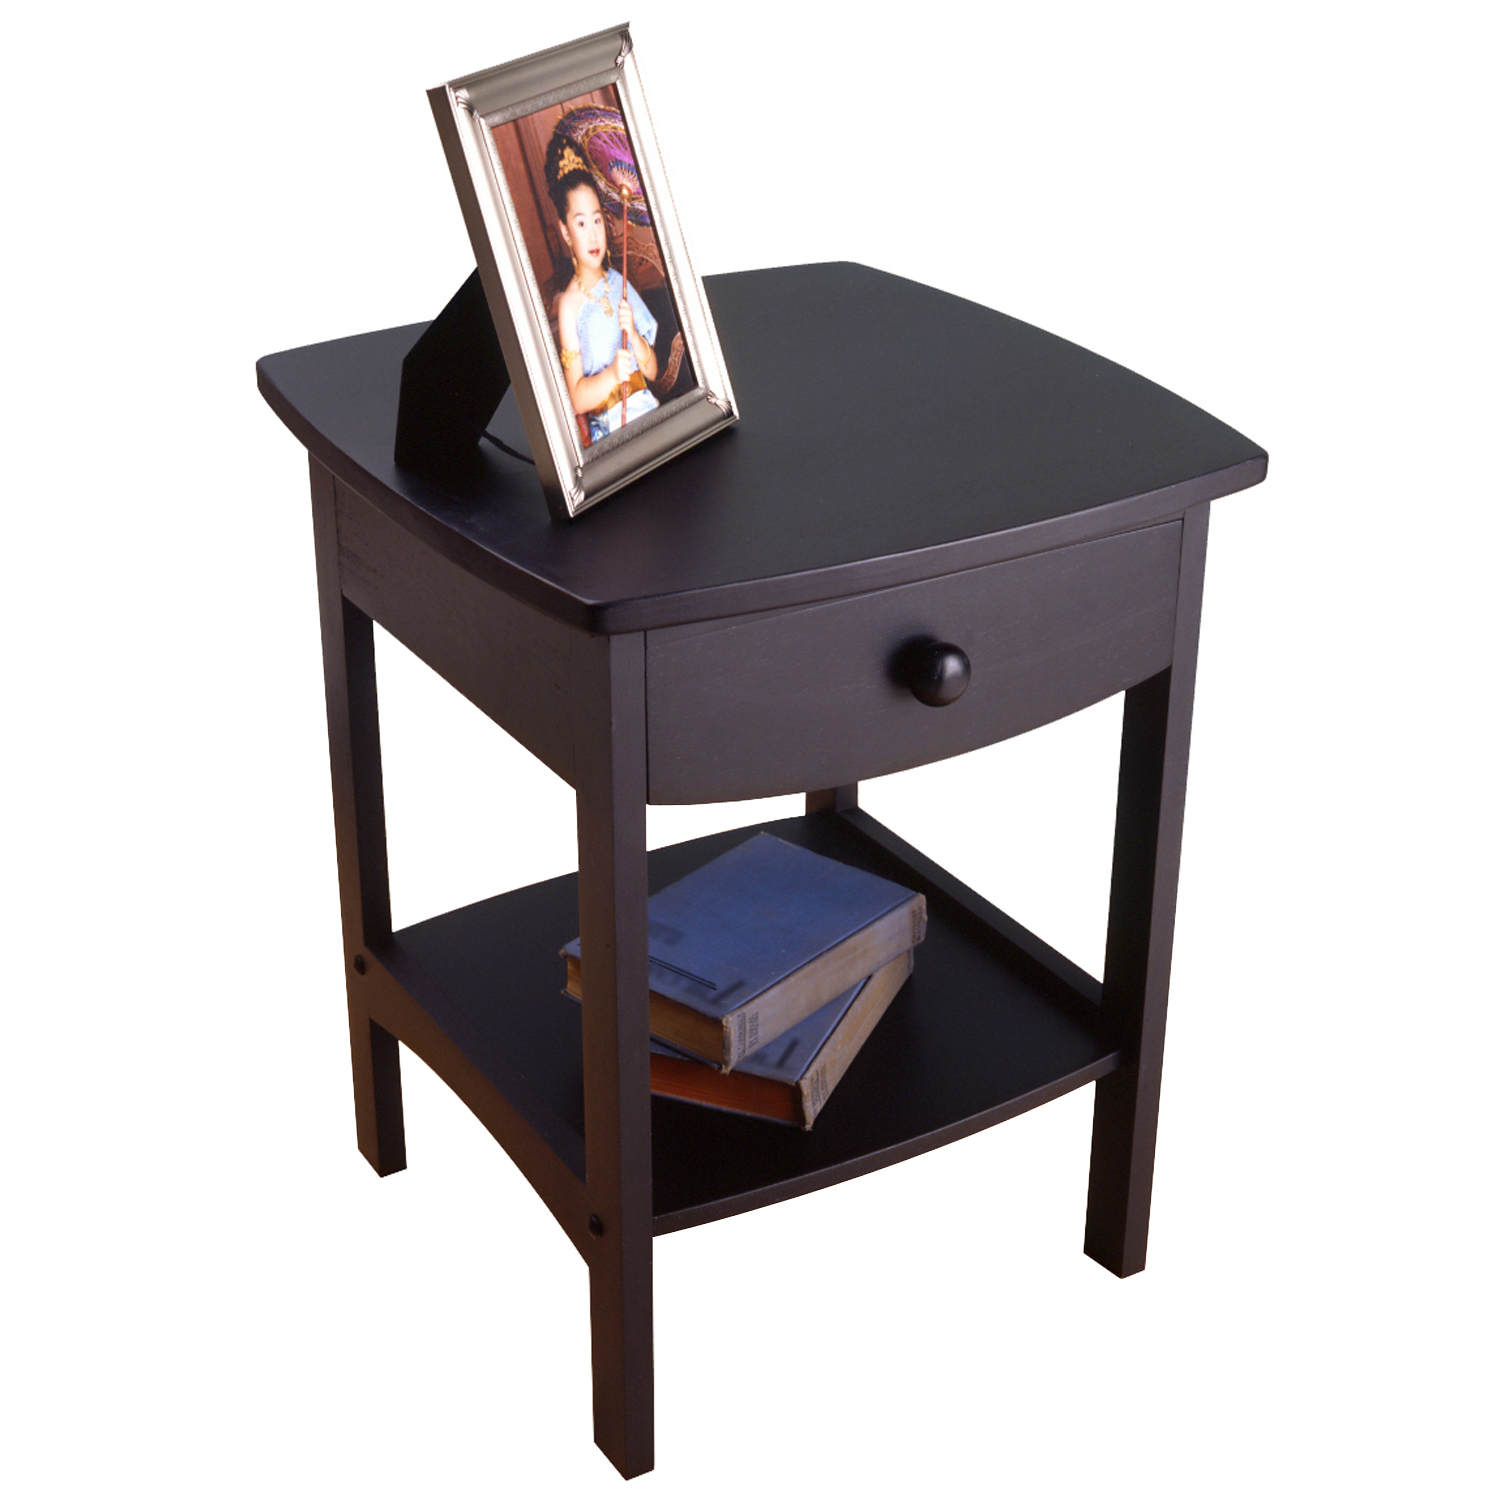 Winsome Wood Claire Curved Nightstand, Black Finish - image 3 of 5